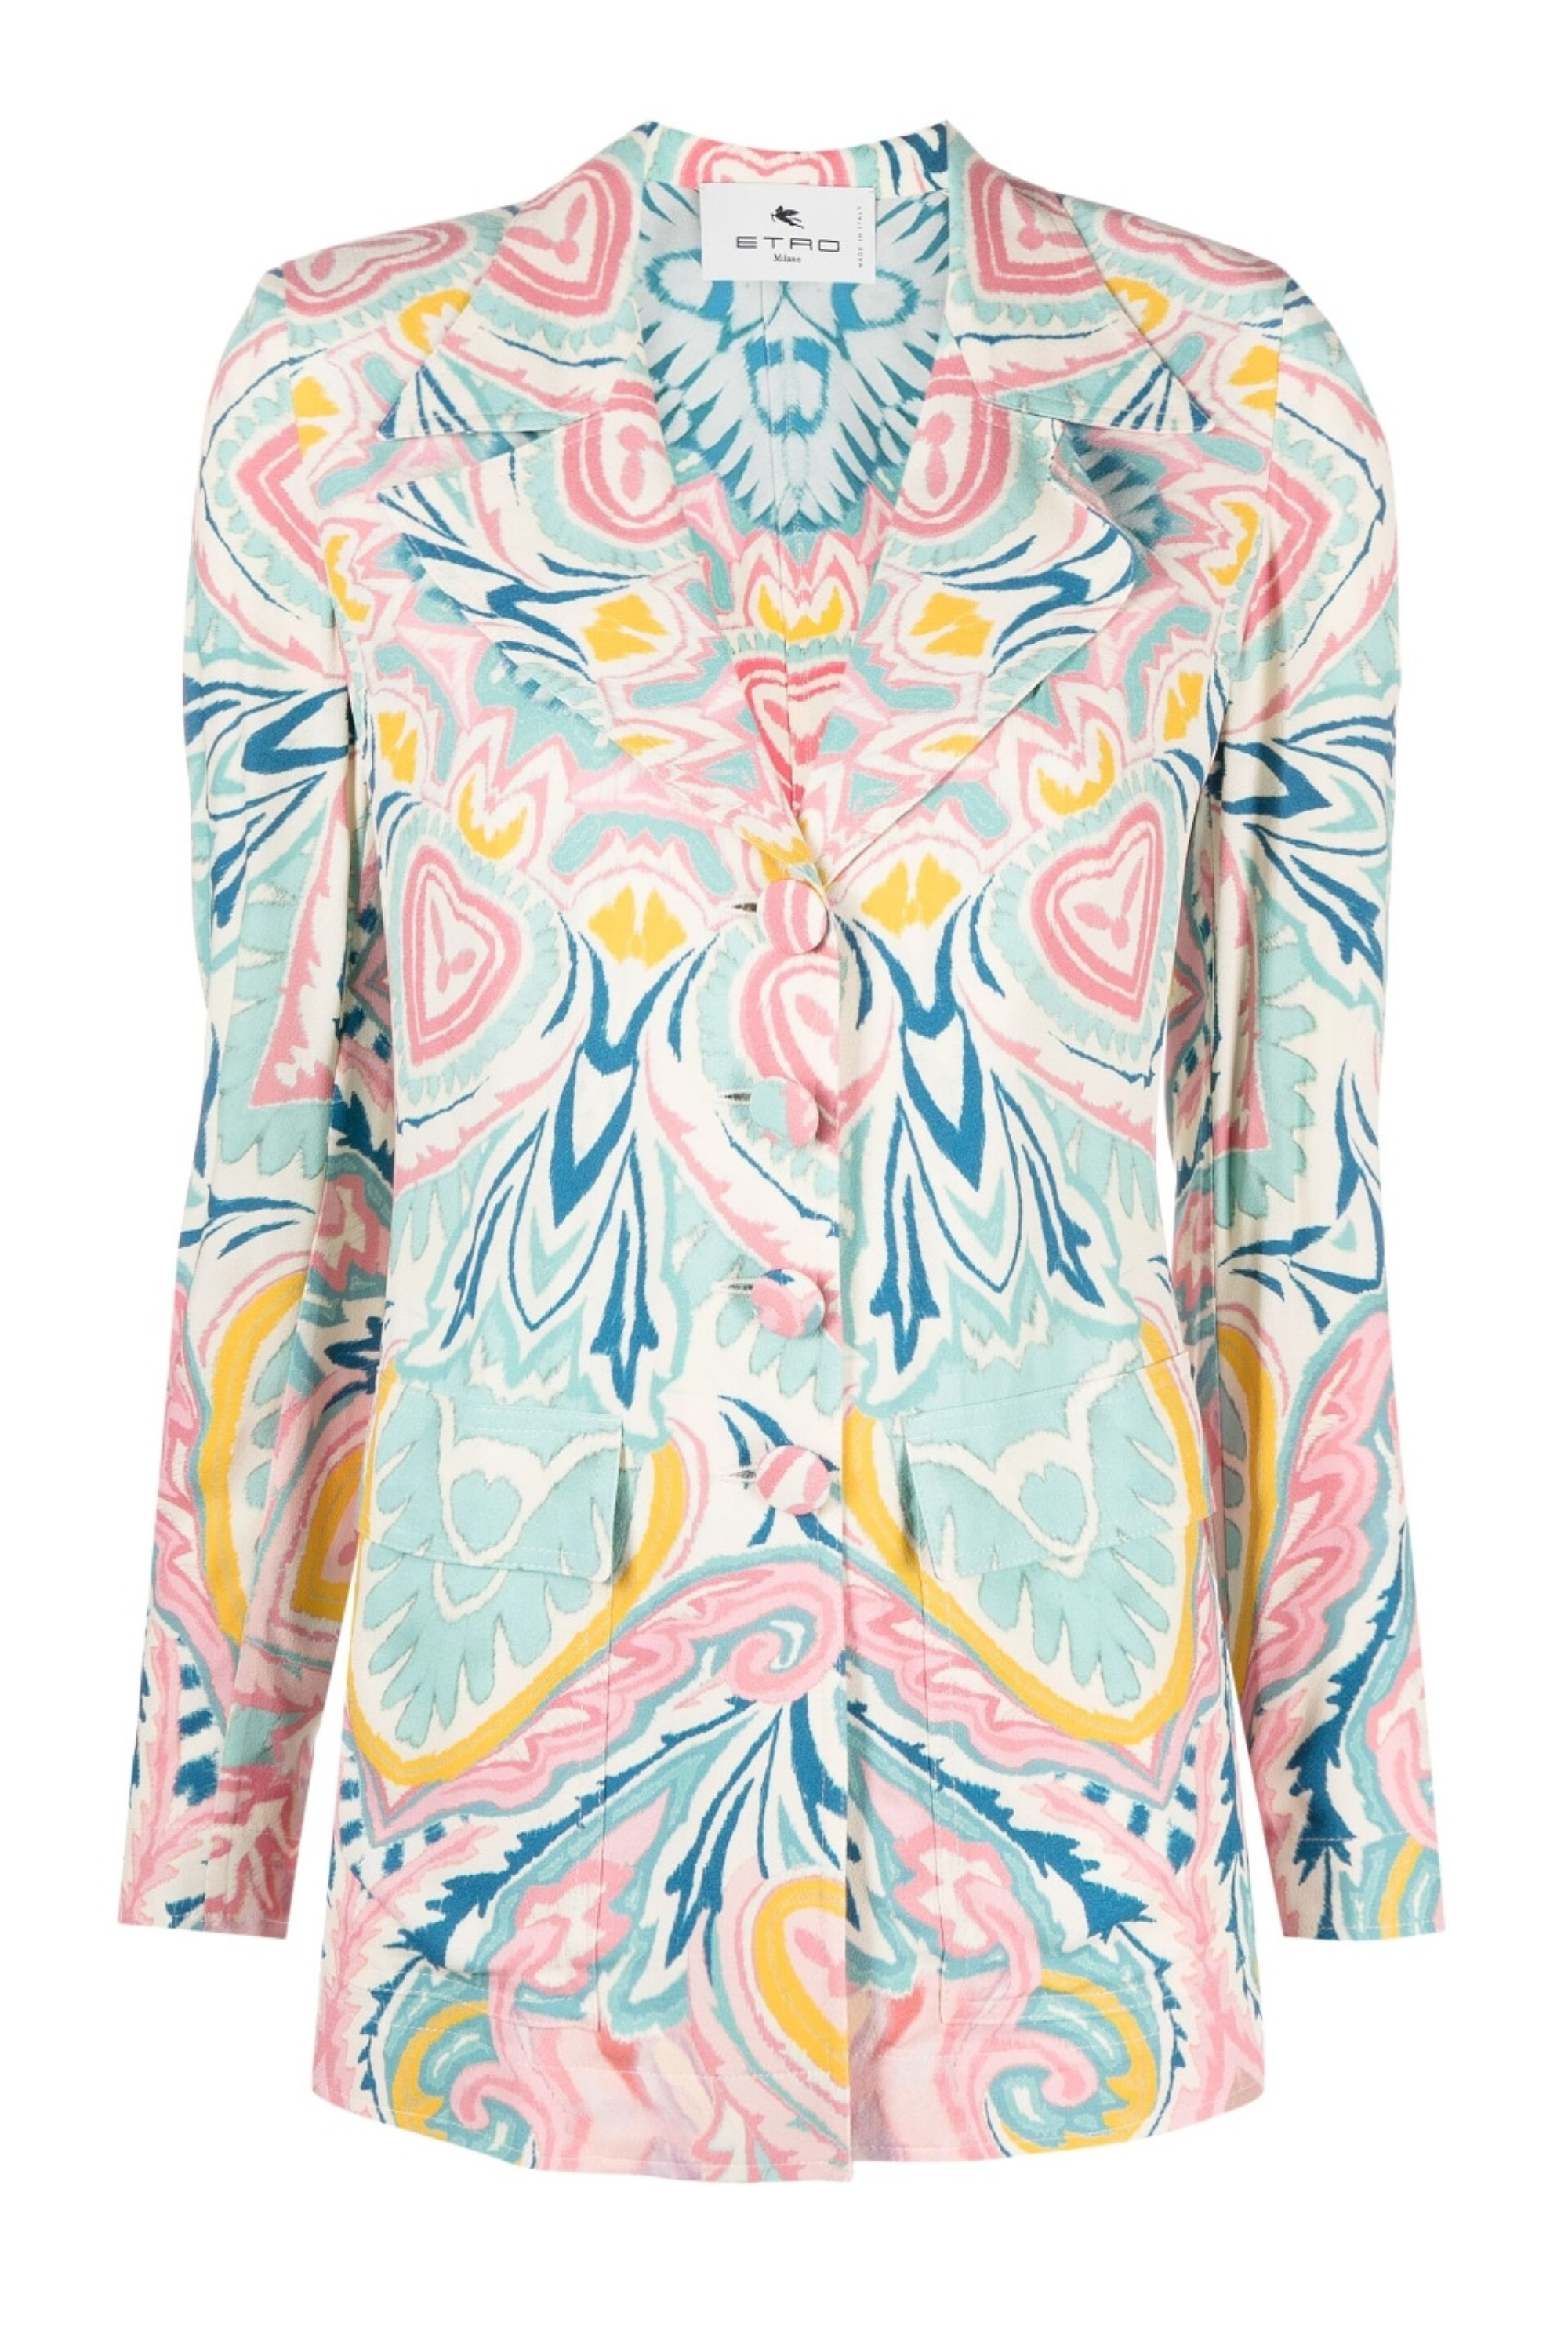 Butterfly Print Blazer by Etro, Colour: Blue/multicolour, Notched Collar, Made in Italy, SS23 Collection, New Arrivals at Espace Cannelle